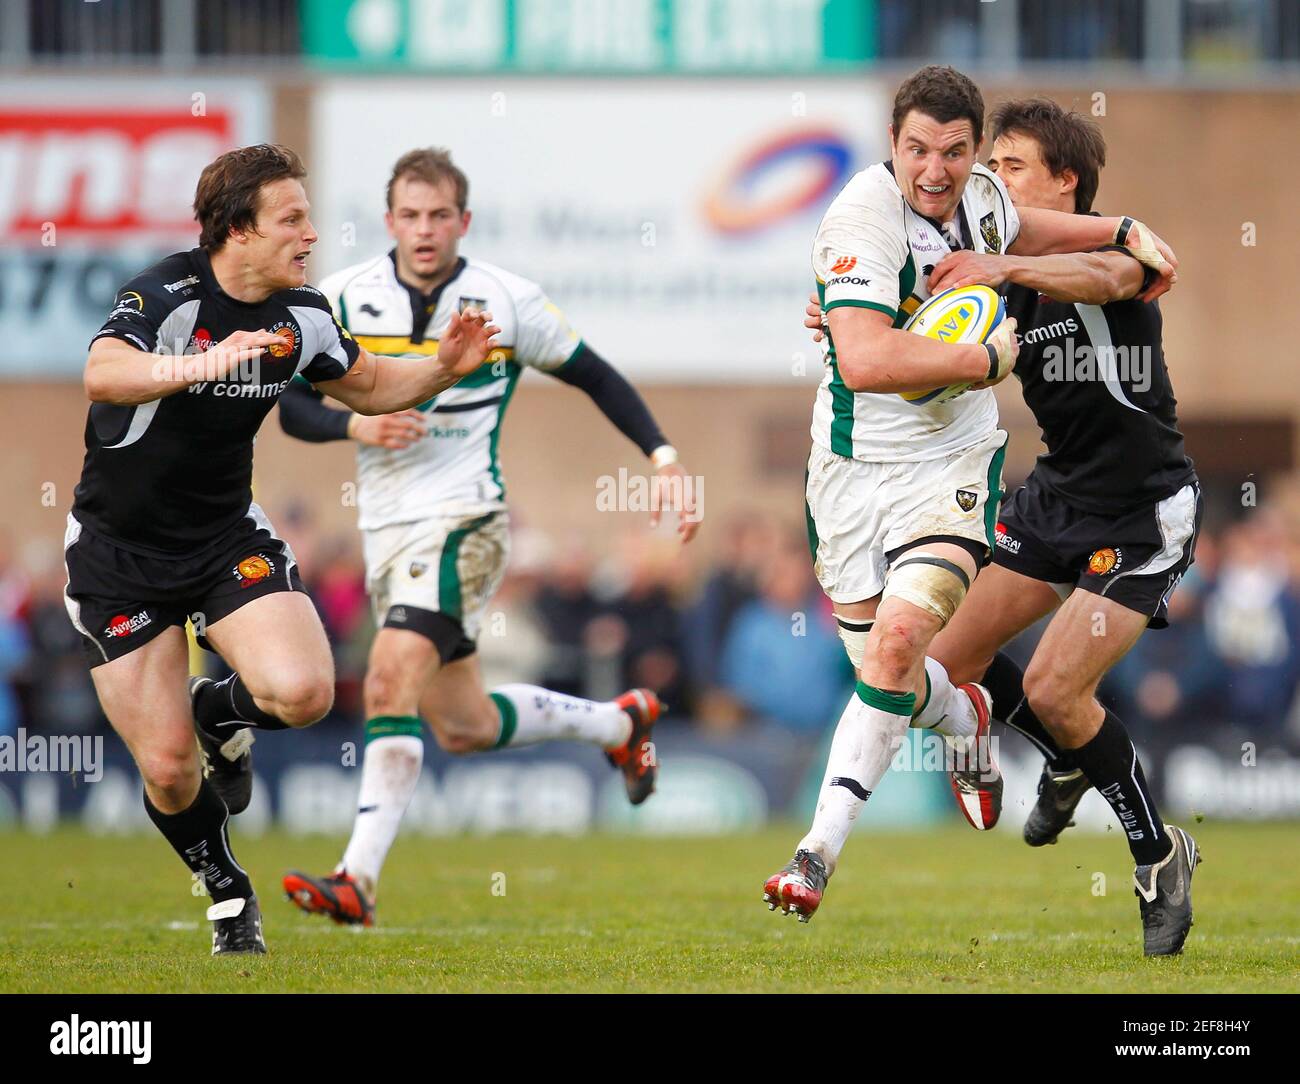 Rugby Union - Exeter Chiefs v Northampton Saints Aviva Premiership  - Sandy Park  - 22/4/12  Northampton Saints' Phil Dowson (2nd R) in action with Exeter Chiefs' Ignacio Mieres (R) and Bryan Rennie   Mandatory Credit: Action Images / James Benwell  Livepic Stock Photo